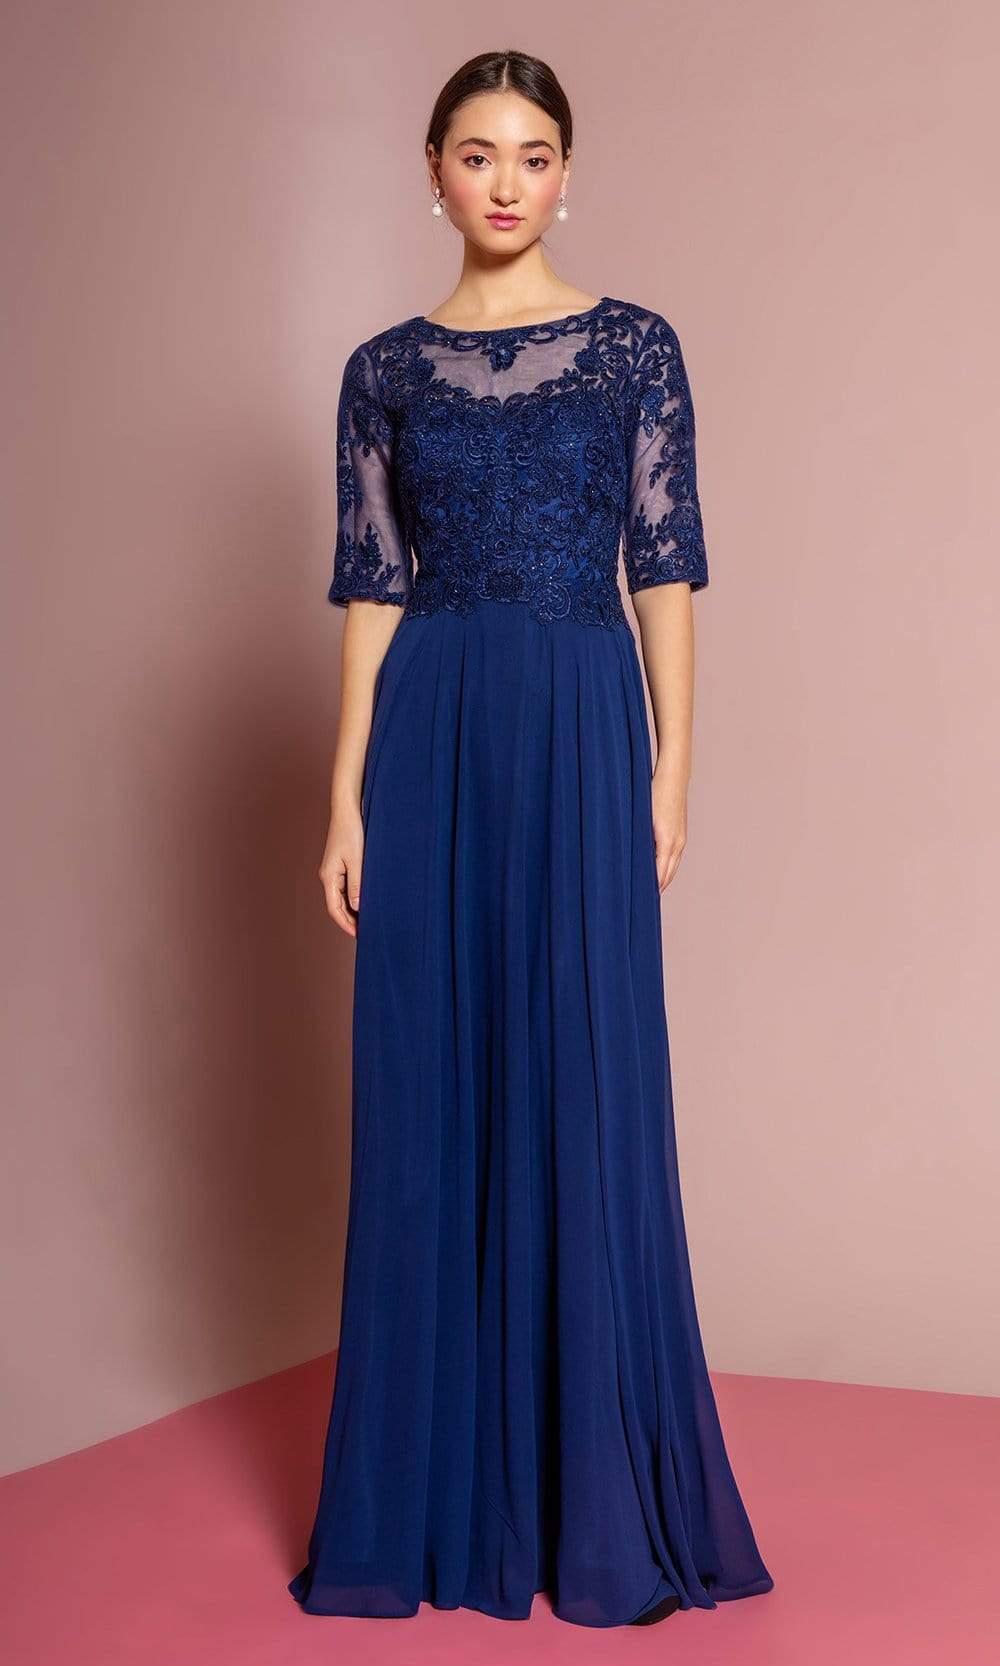 Image of Elizabeth K - GL2681 Half Sleeve Embroidered Illusion Lace Gown